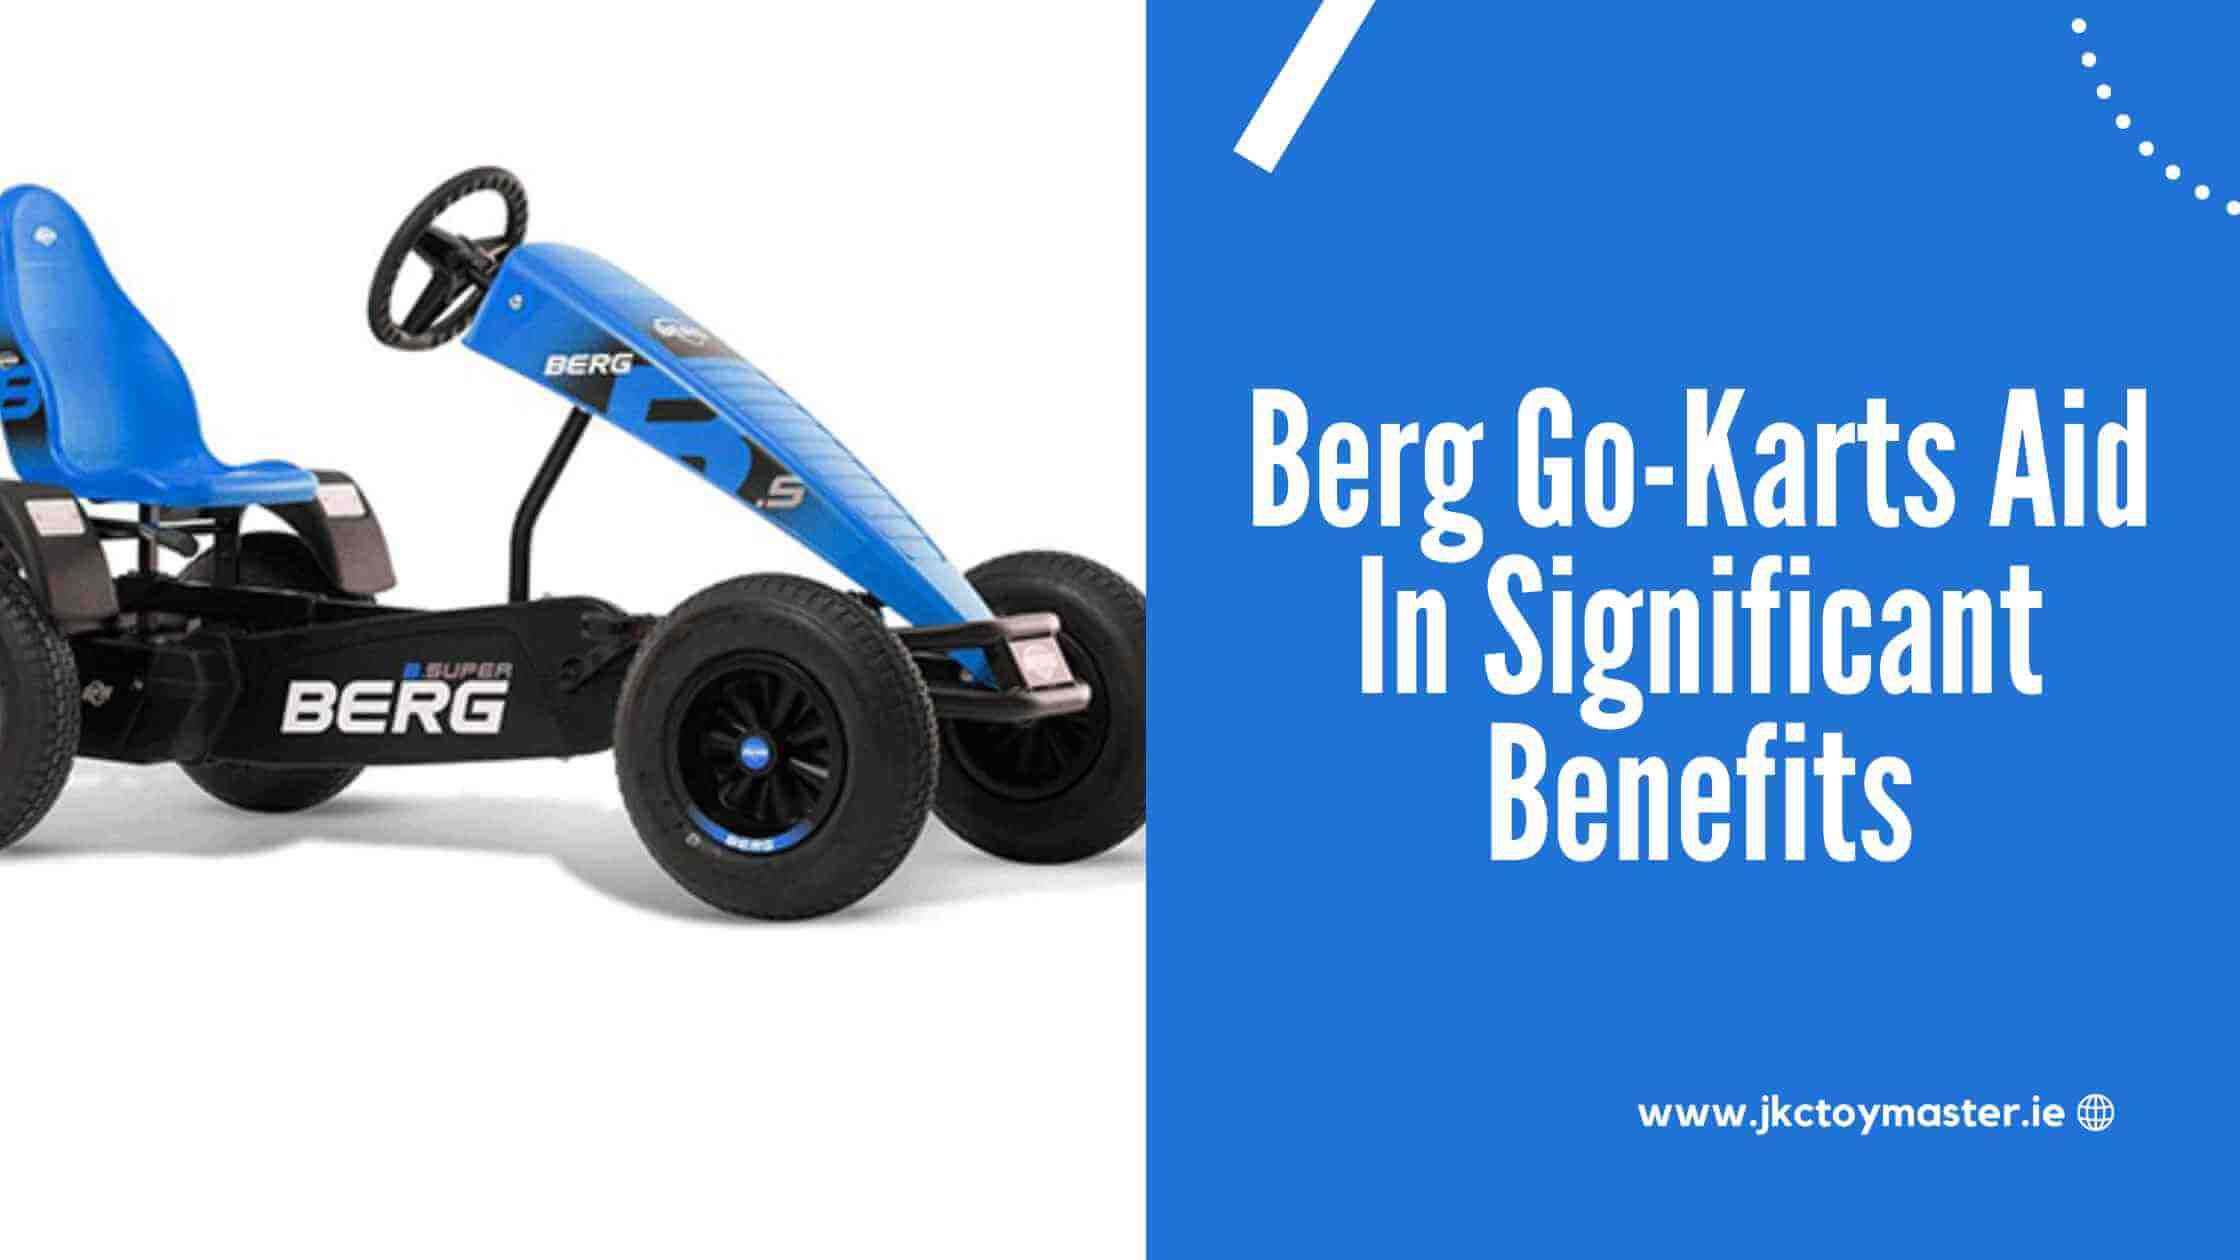 10 Benefits Of Berg Go Kart To Be Aware Of and Take Up Without Worries